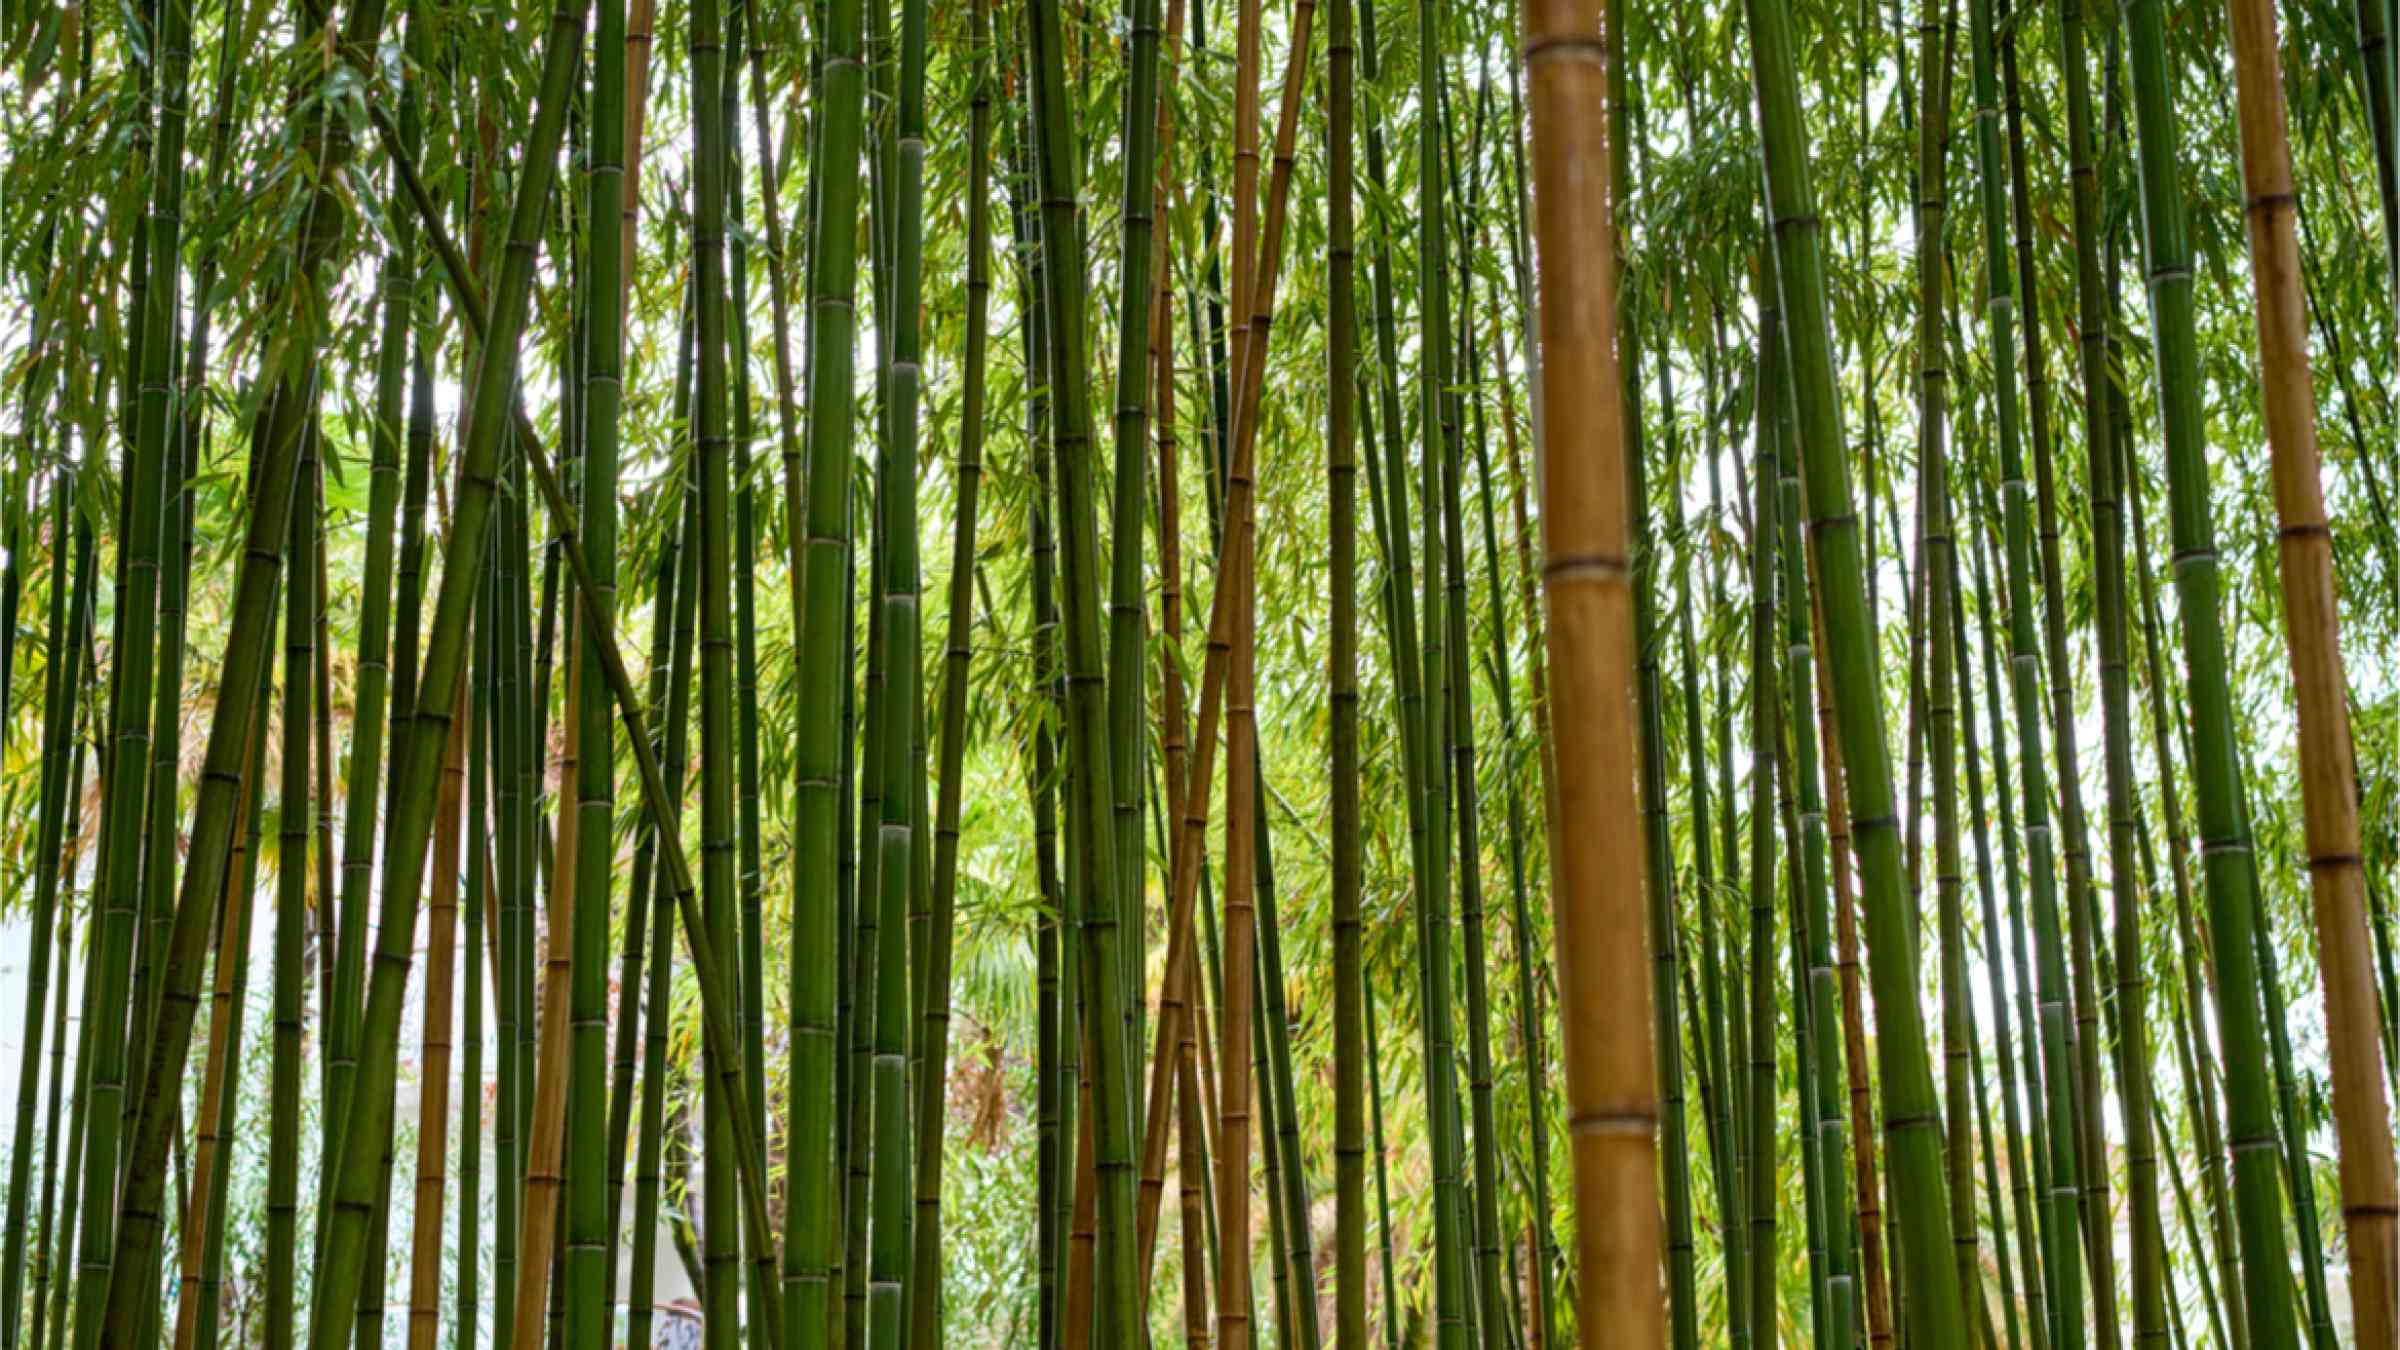 This image shows a bamboo forest